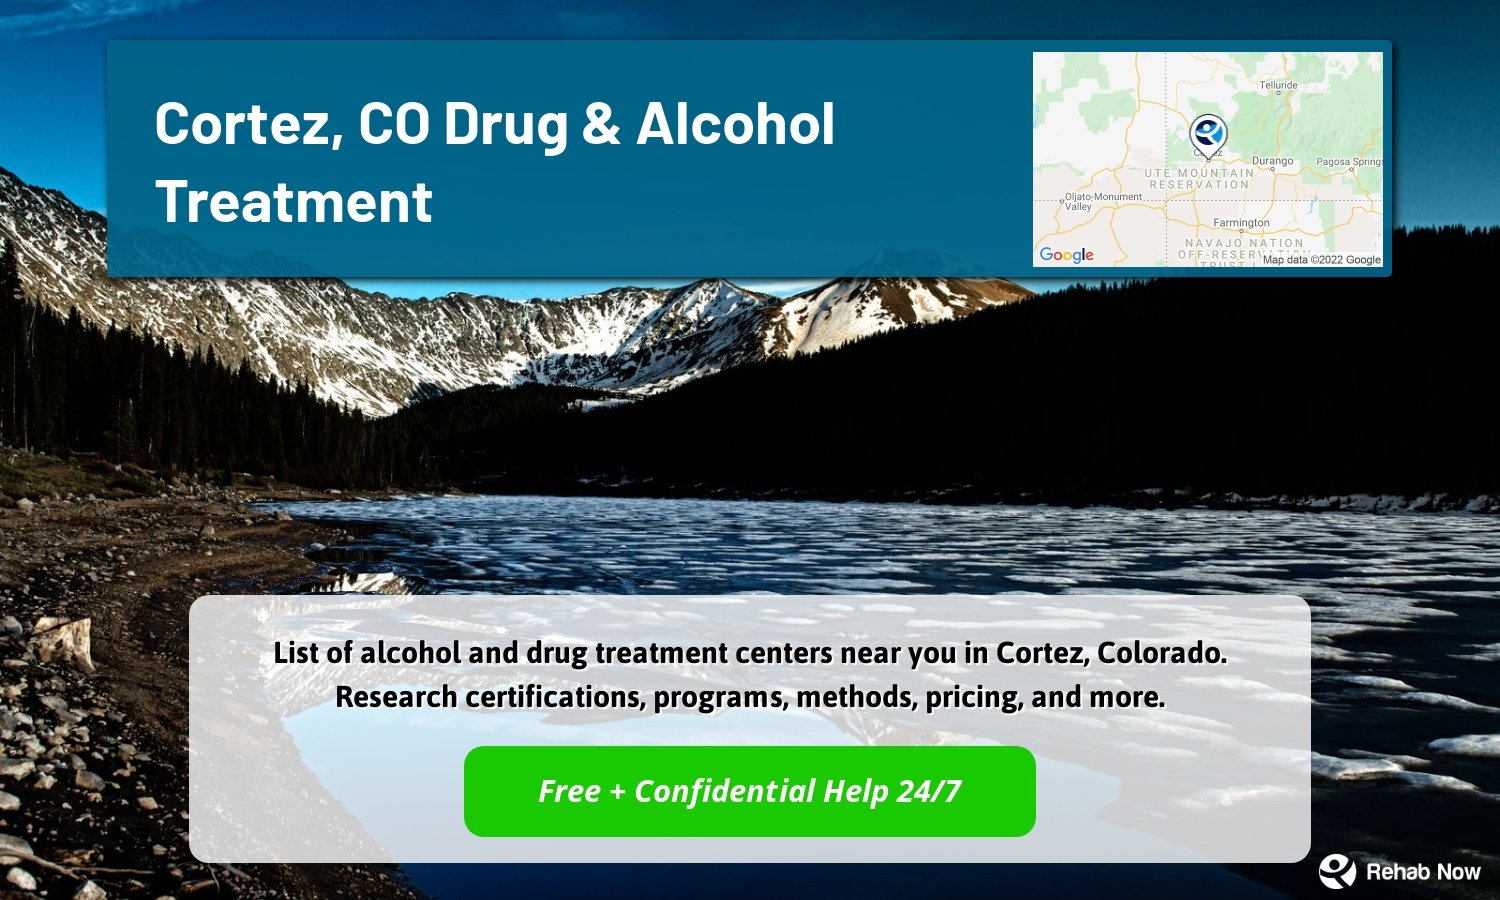 List of alcohol and drug treatment centers near you in Cortez, Colorado. Research certifications, programs, methods, pricing, and more.